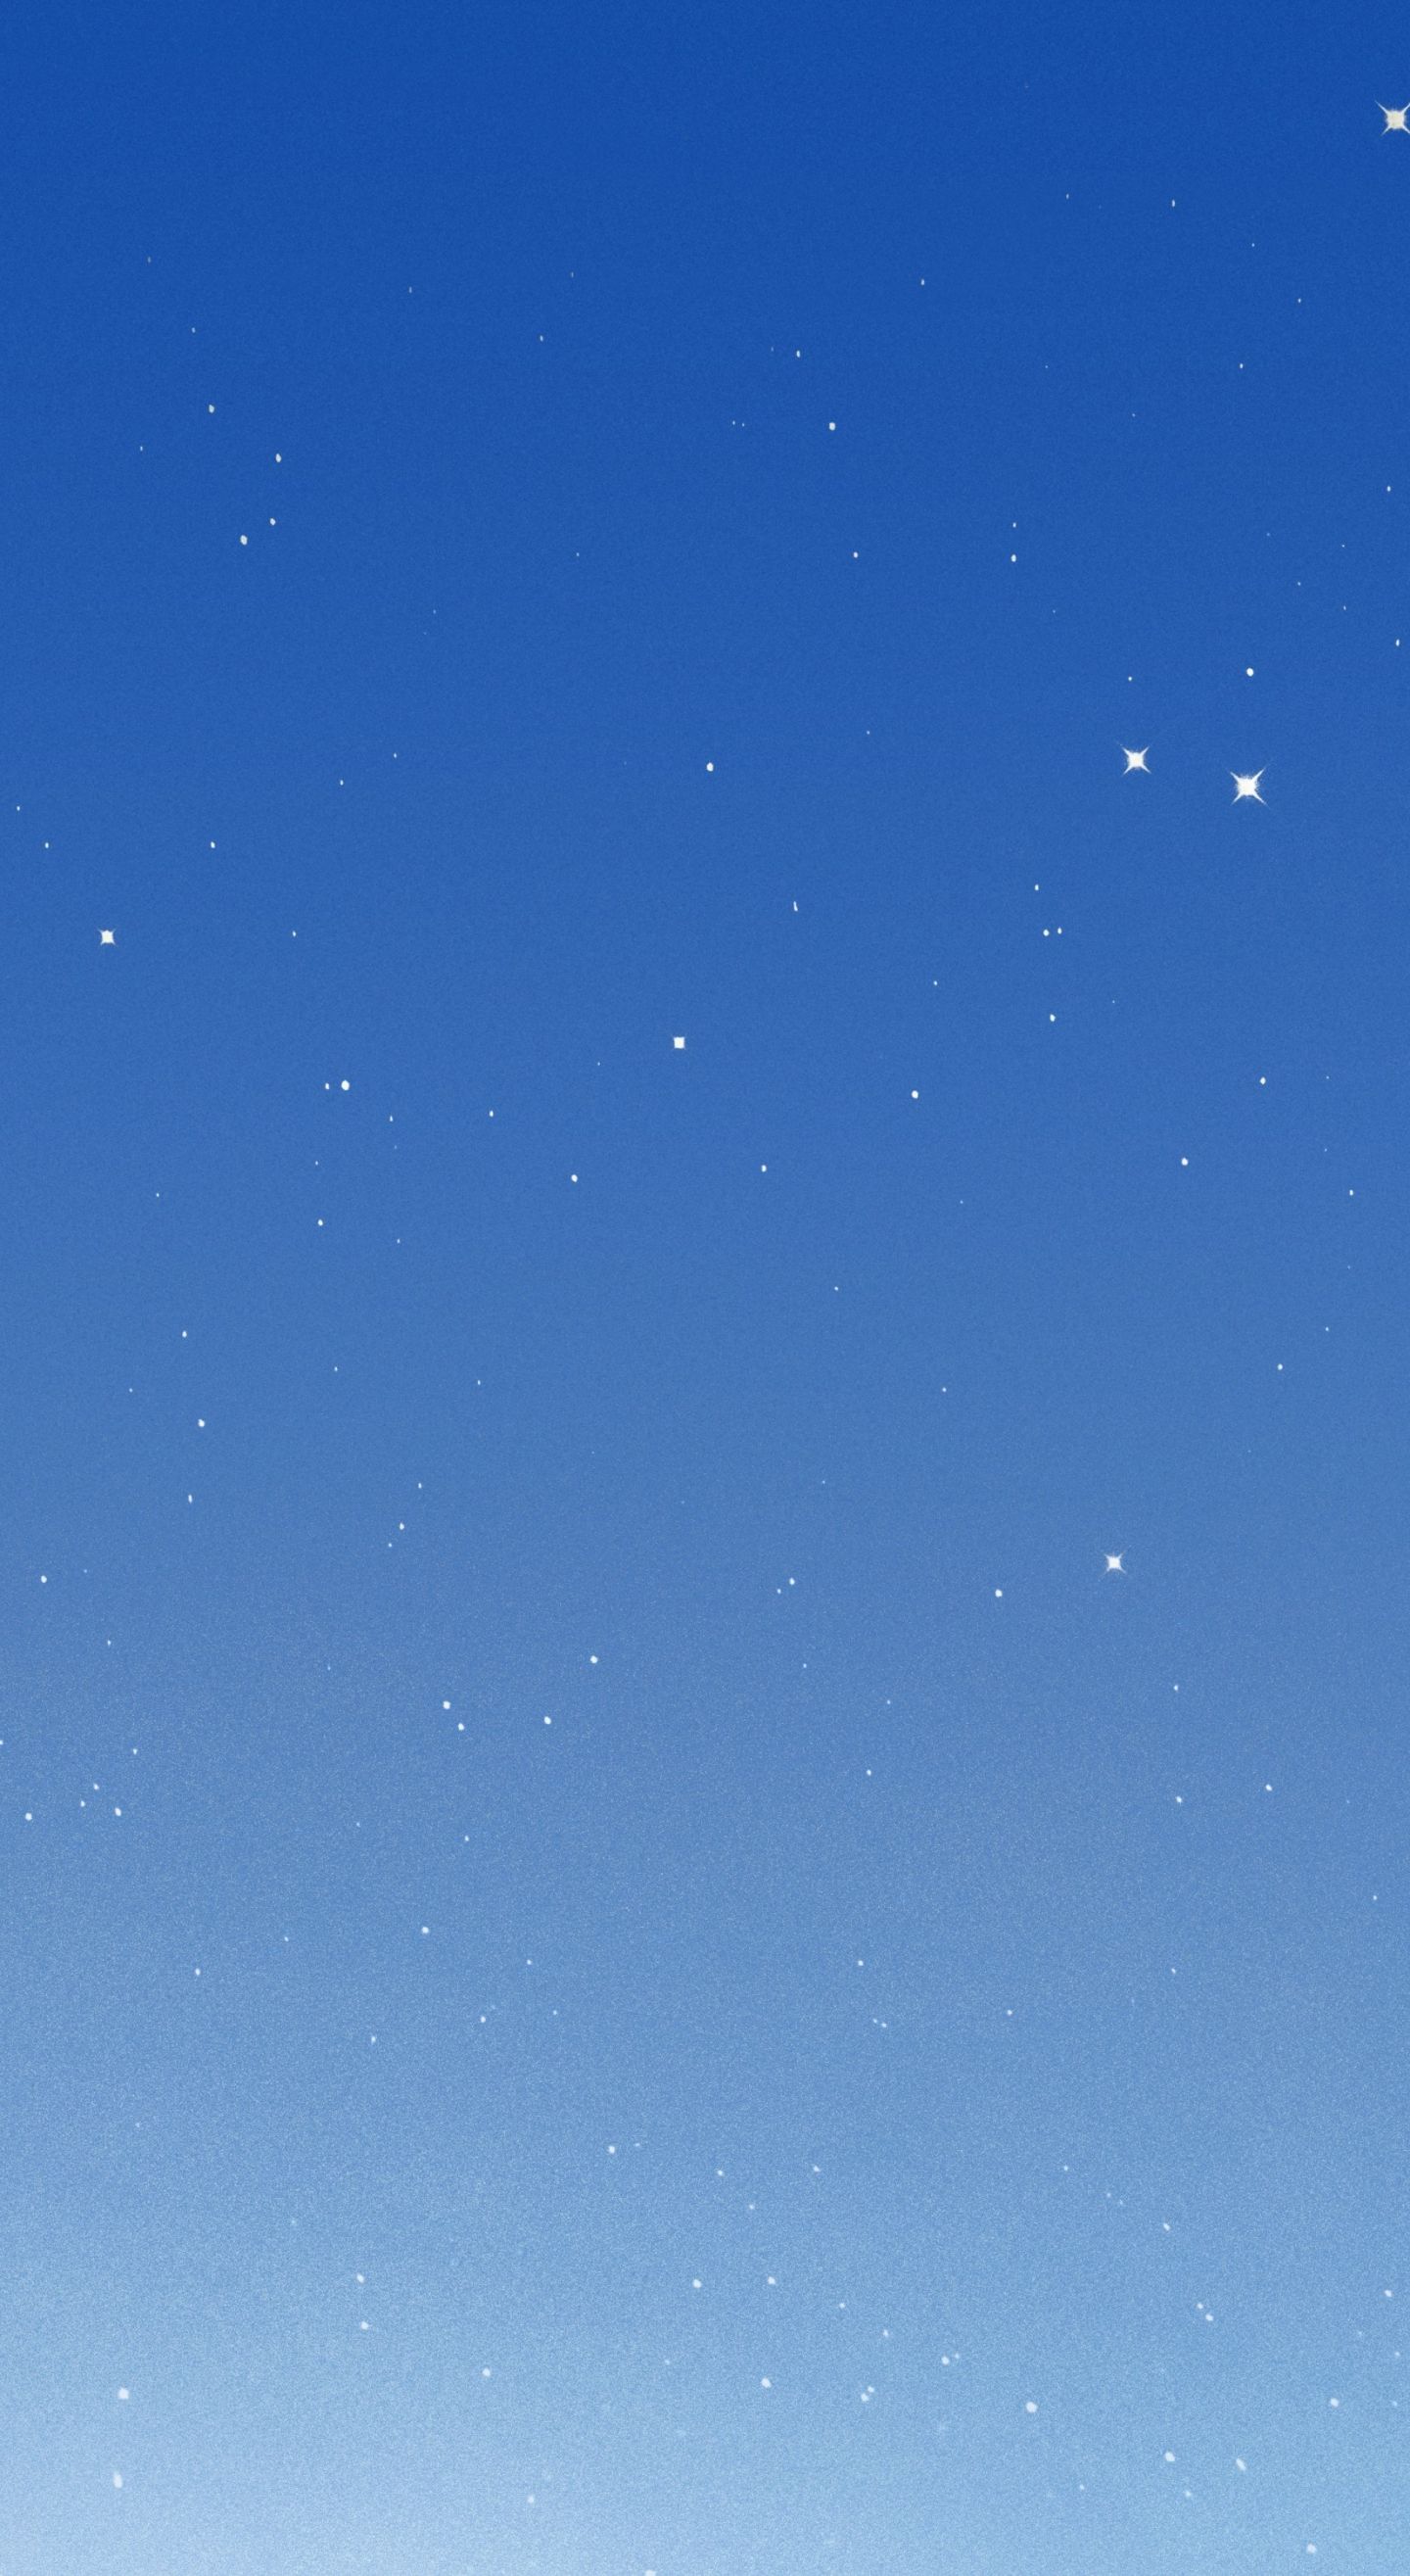 Download 1440x2630 wallpaper clear sky, sky, blue, stars, evening, samsung galaxy note 1440x2630 HD image, background, 4819